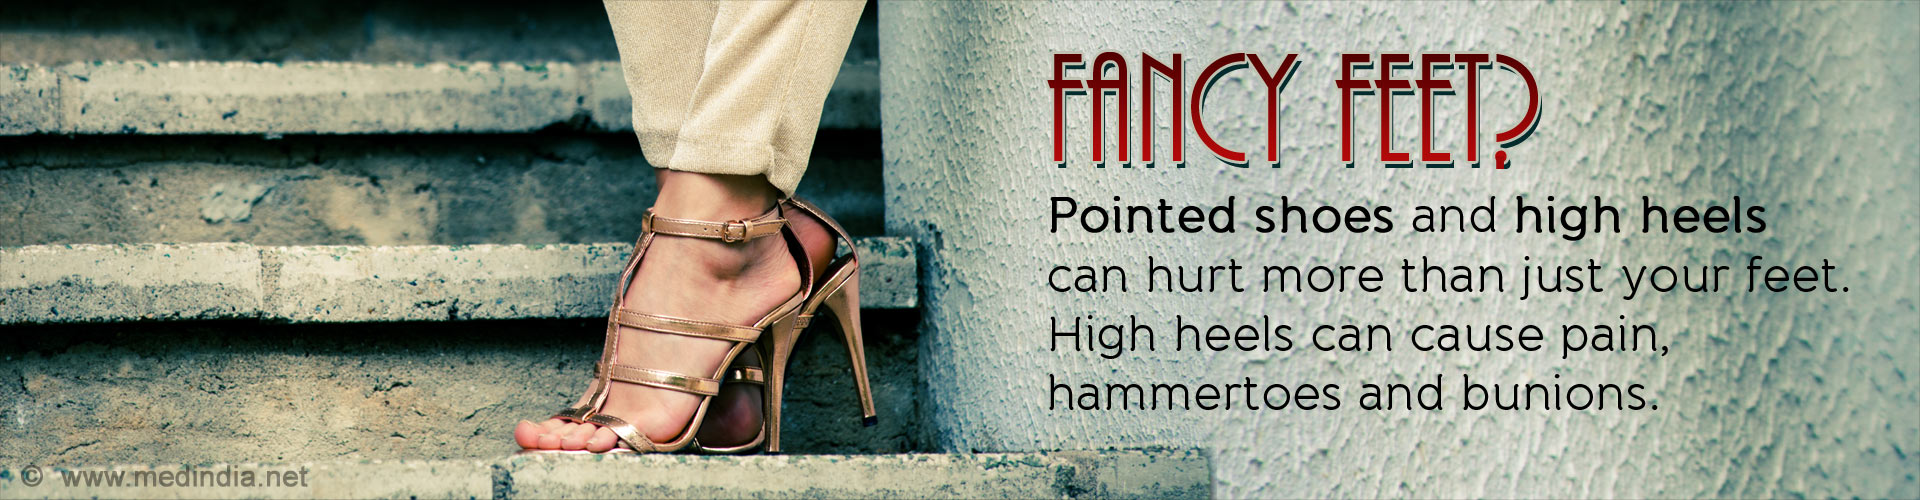 Fancy Feet? Pointed Shoes and High Heels can Hurt More Than just Your Feet. High heels can cause pain, hammertoes and bunions.